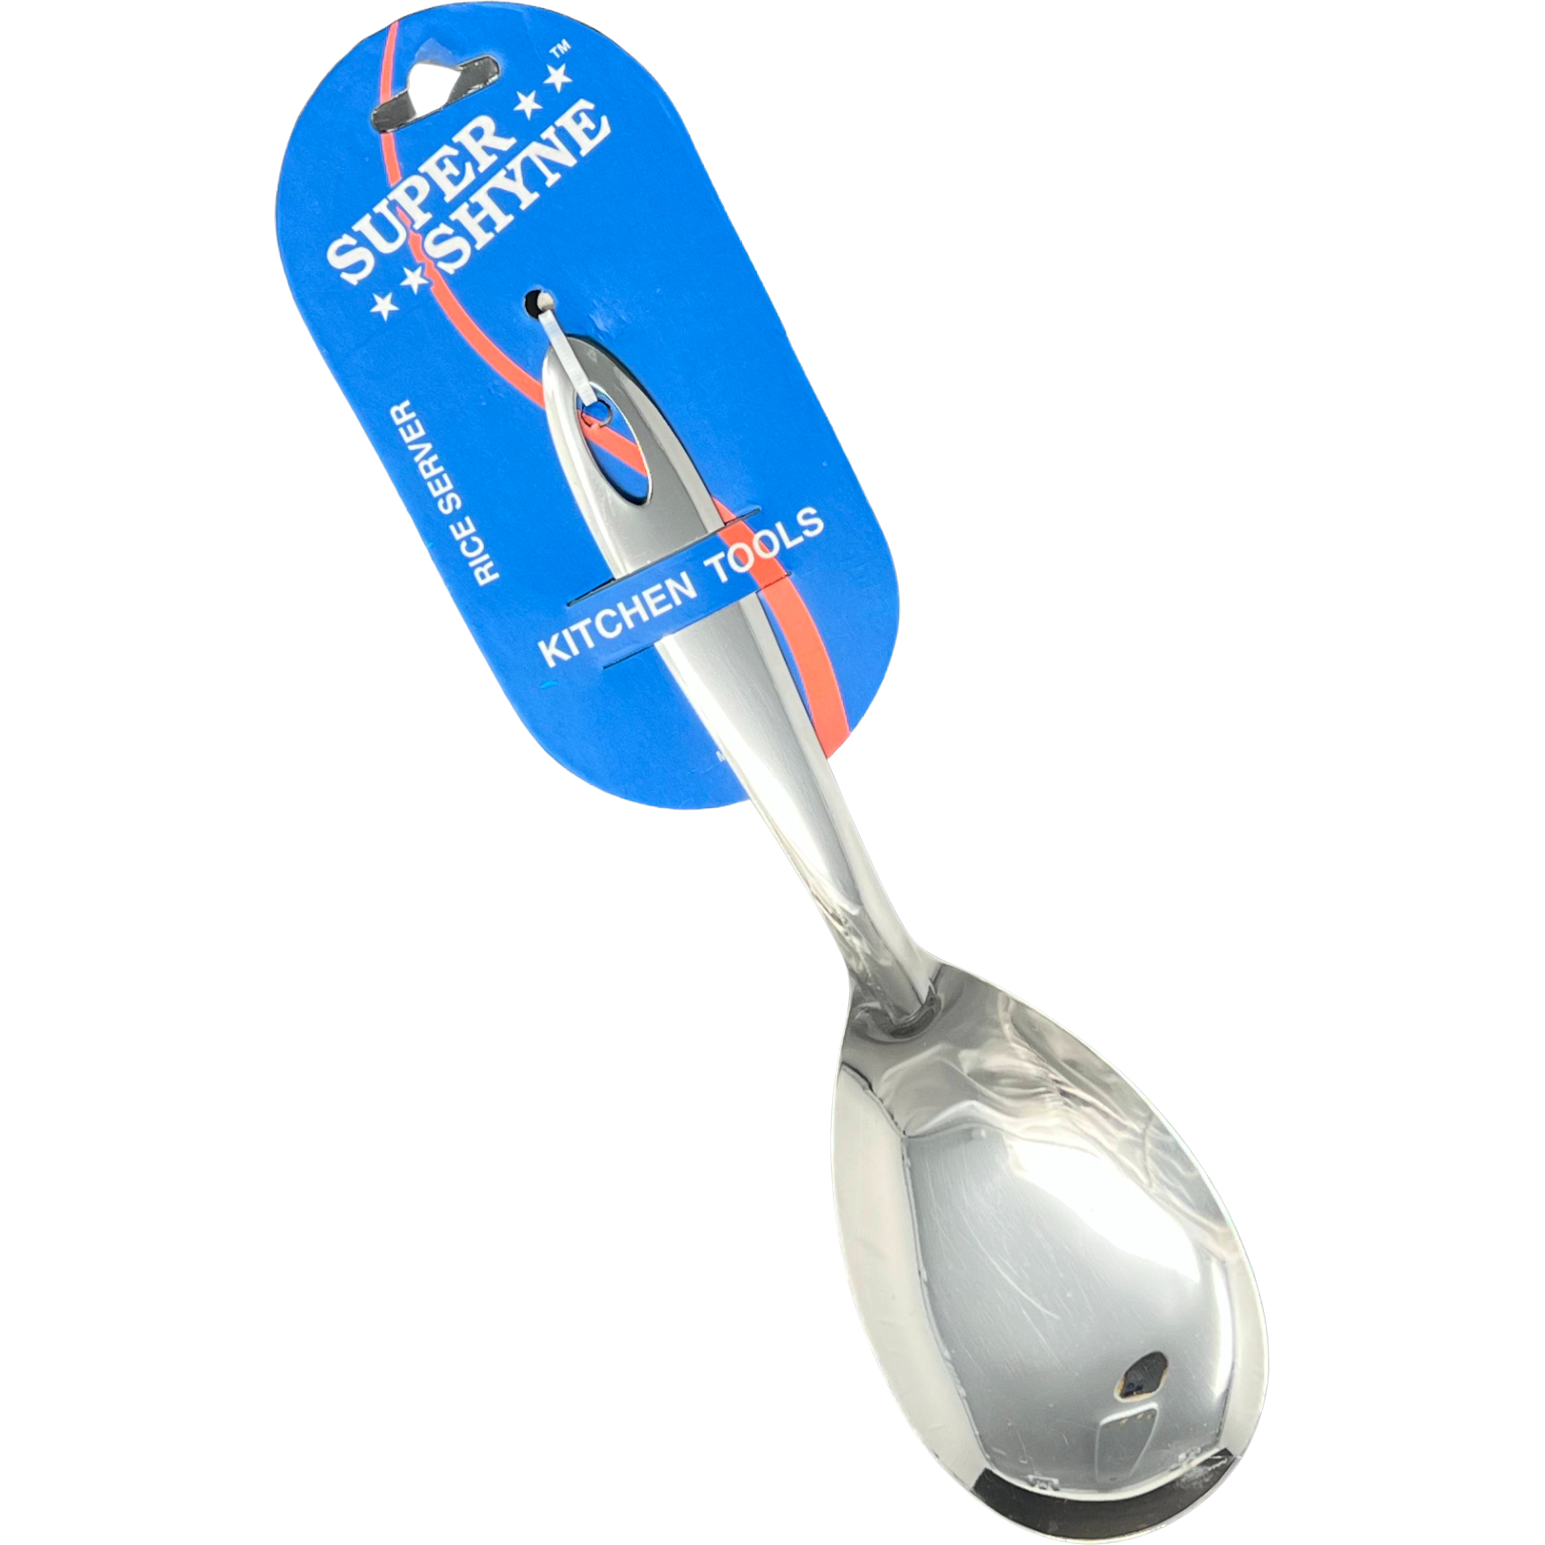 Super Shyne Stainless Steel Rice Serving Spoon